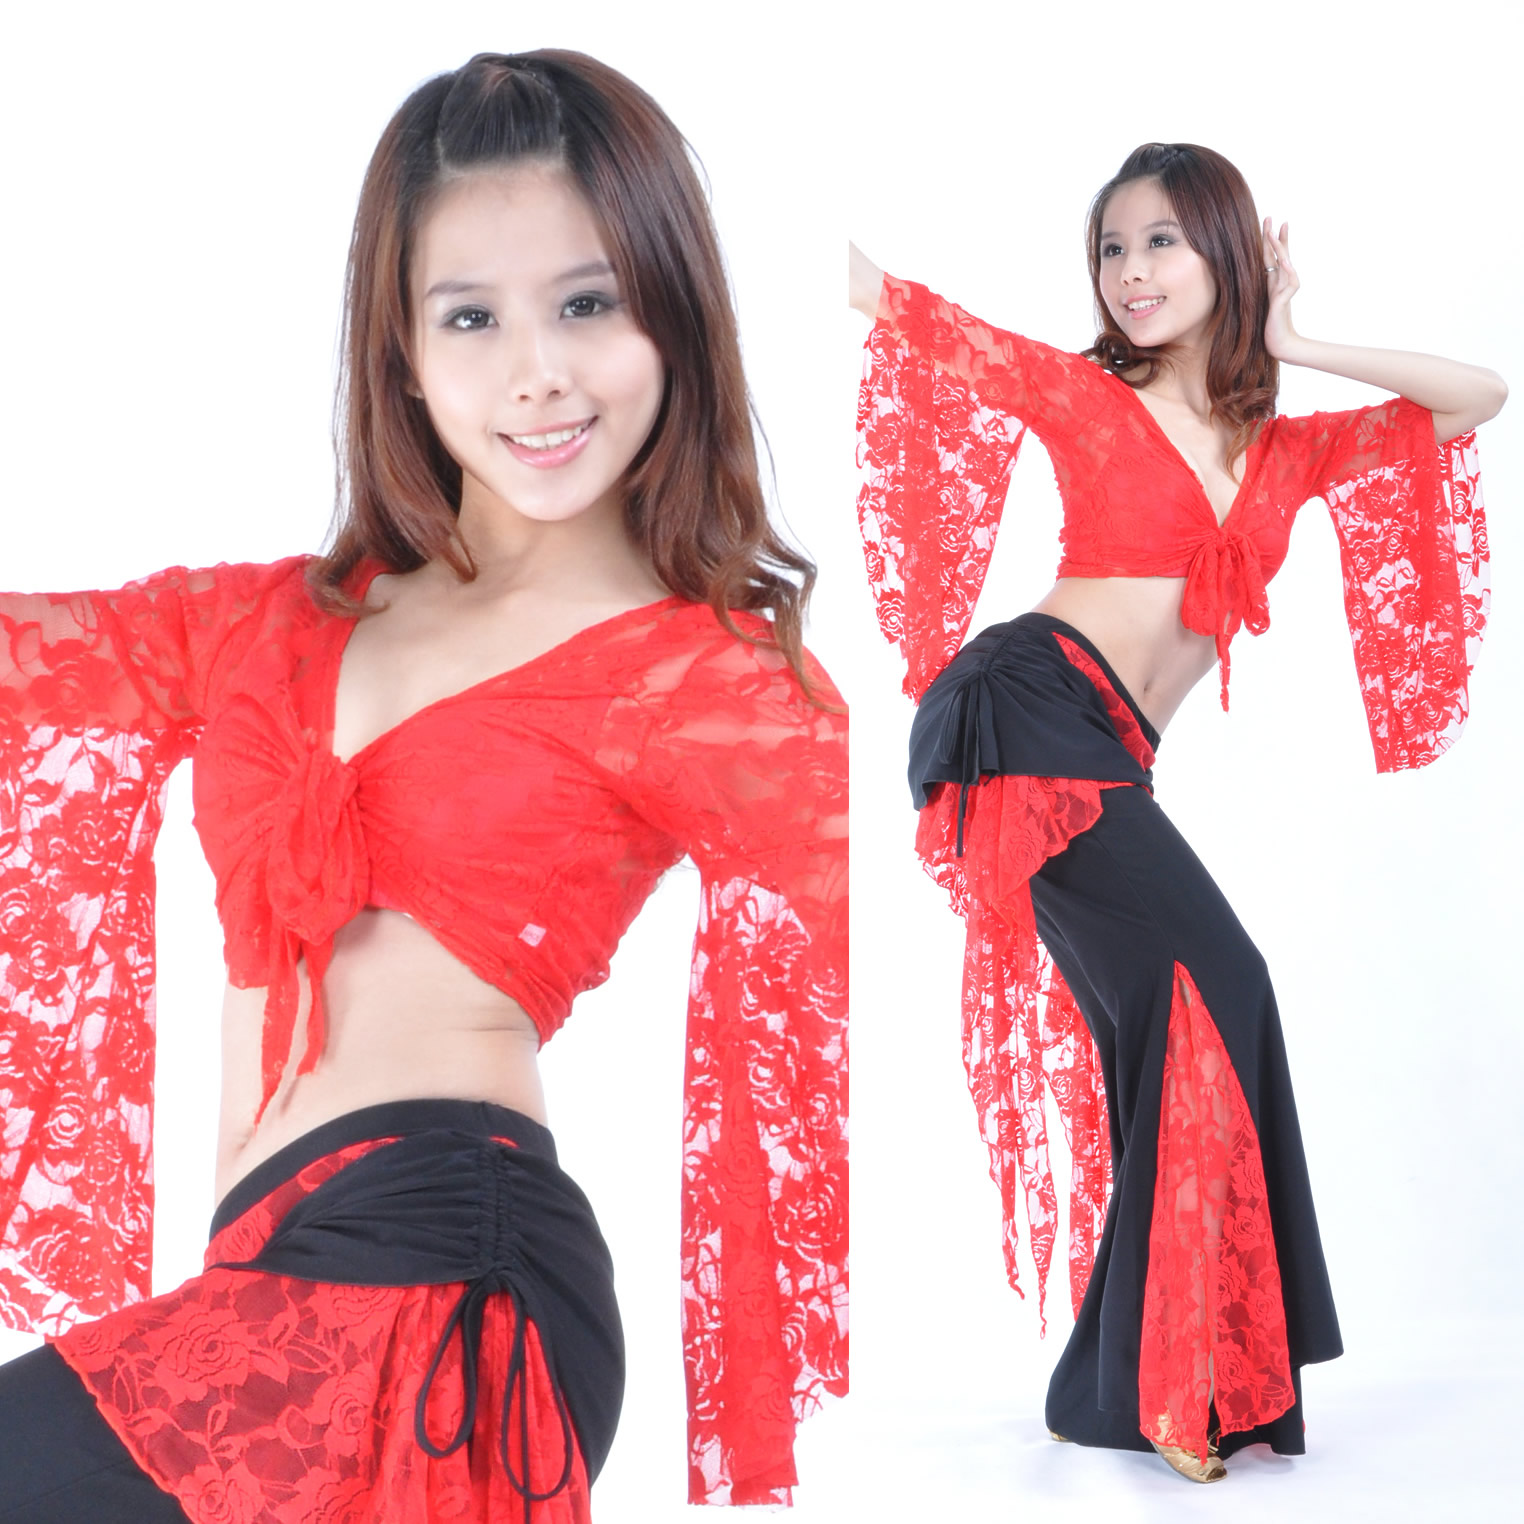 Dancewear Lace Belly Dance Costumes For Ladies More Colors